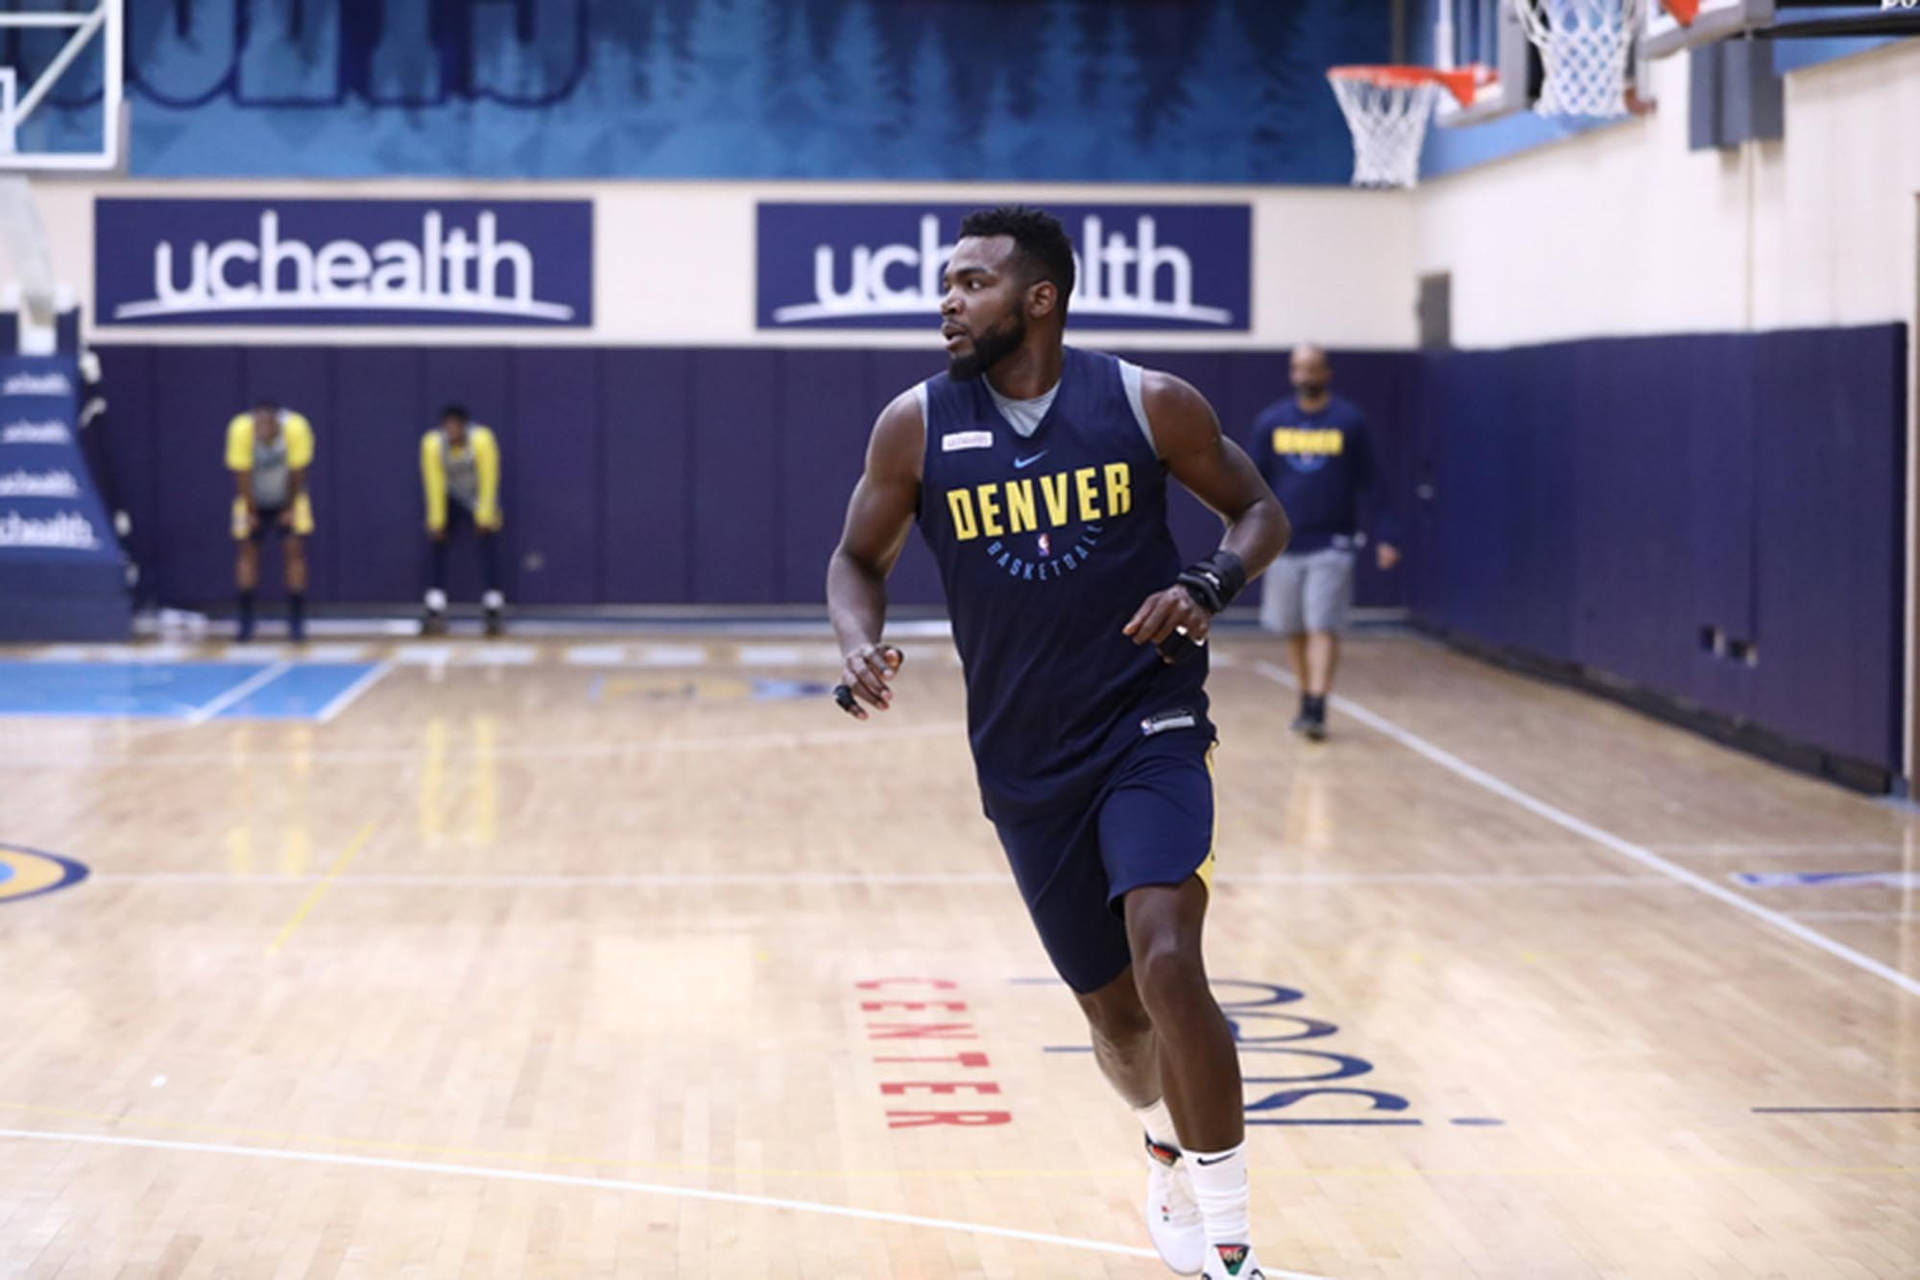 Paul Millsap At Uc Health Court Background